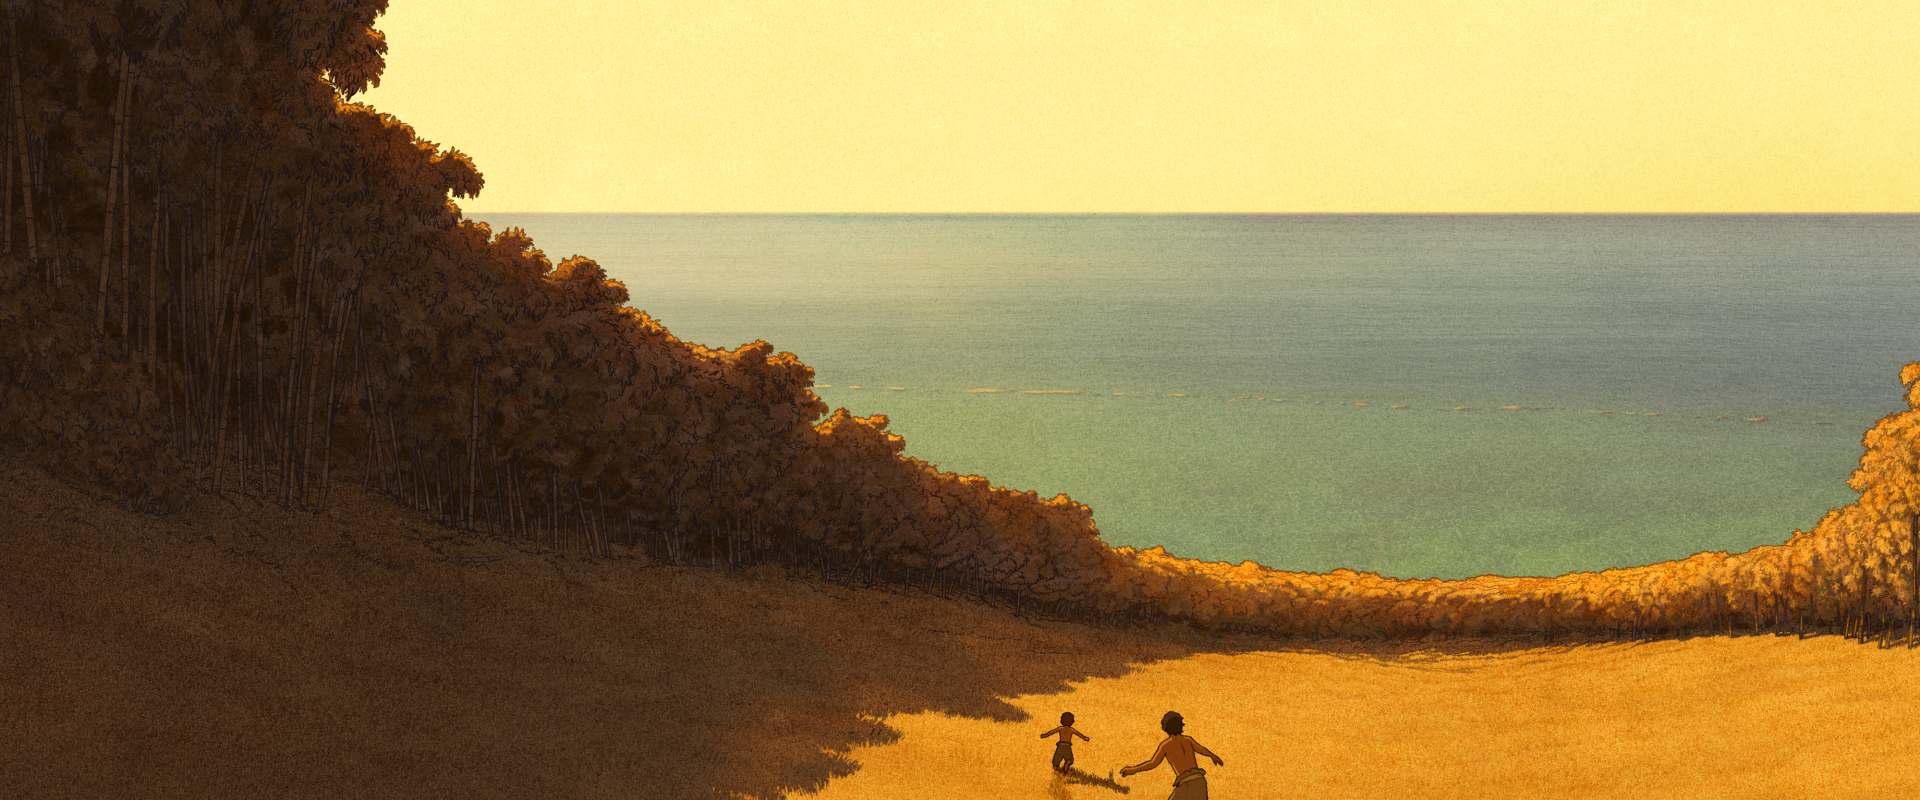 The Red Turtle background 1